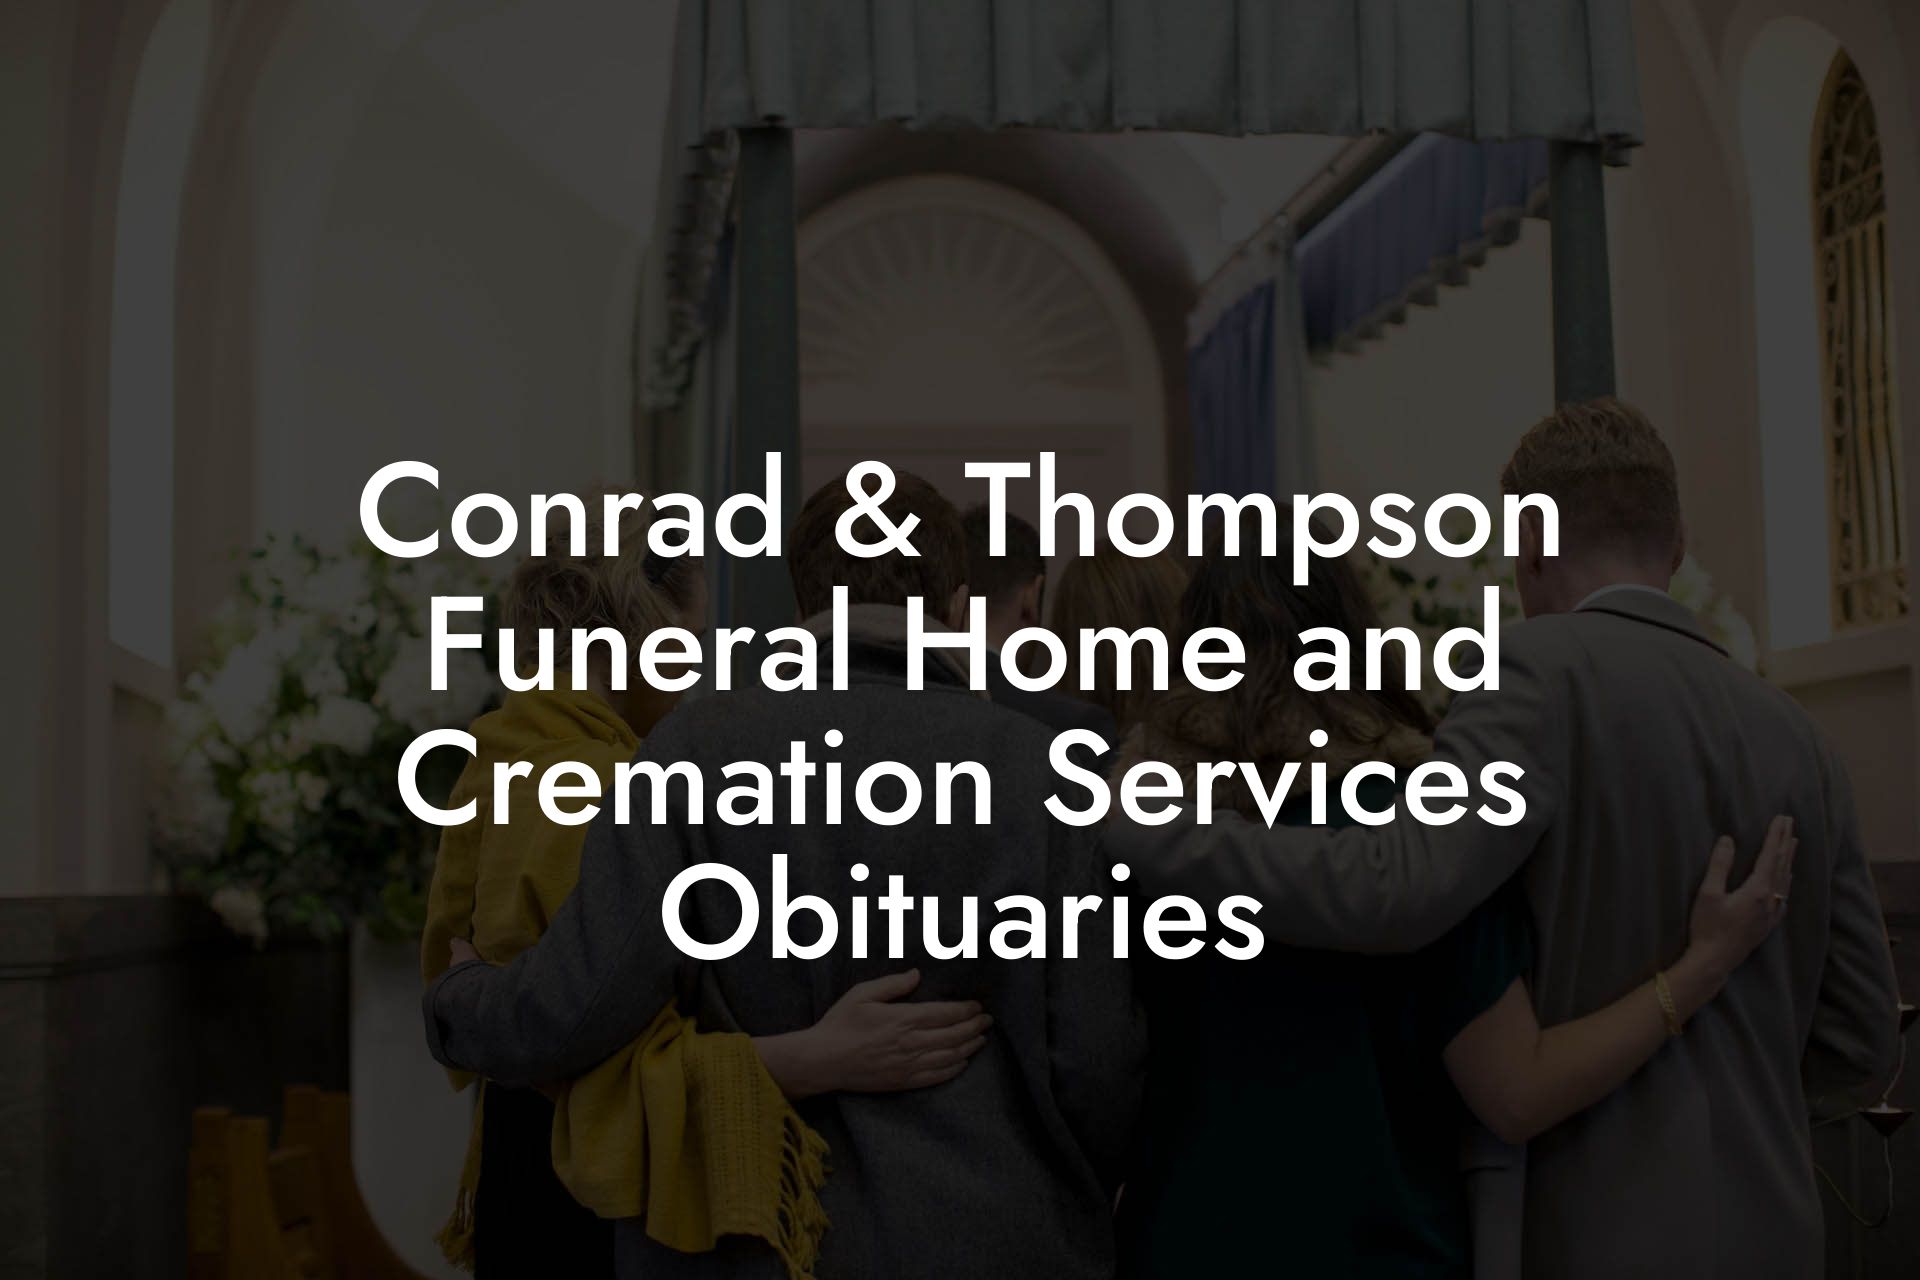 Conrad & Thompson Funeral Home and Cremation Services Obituaries